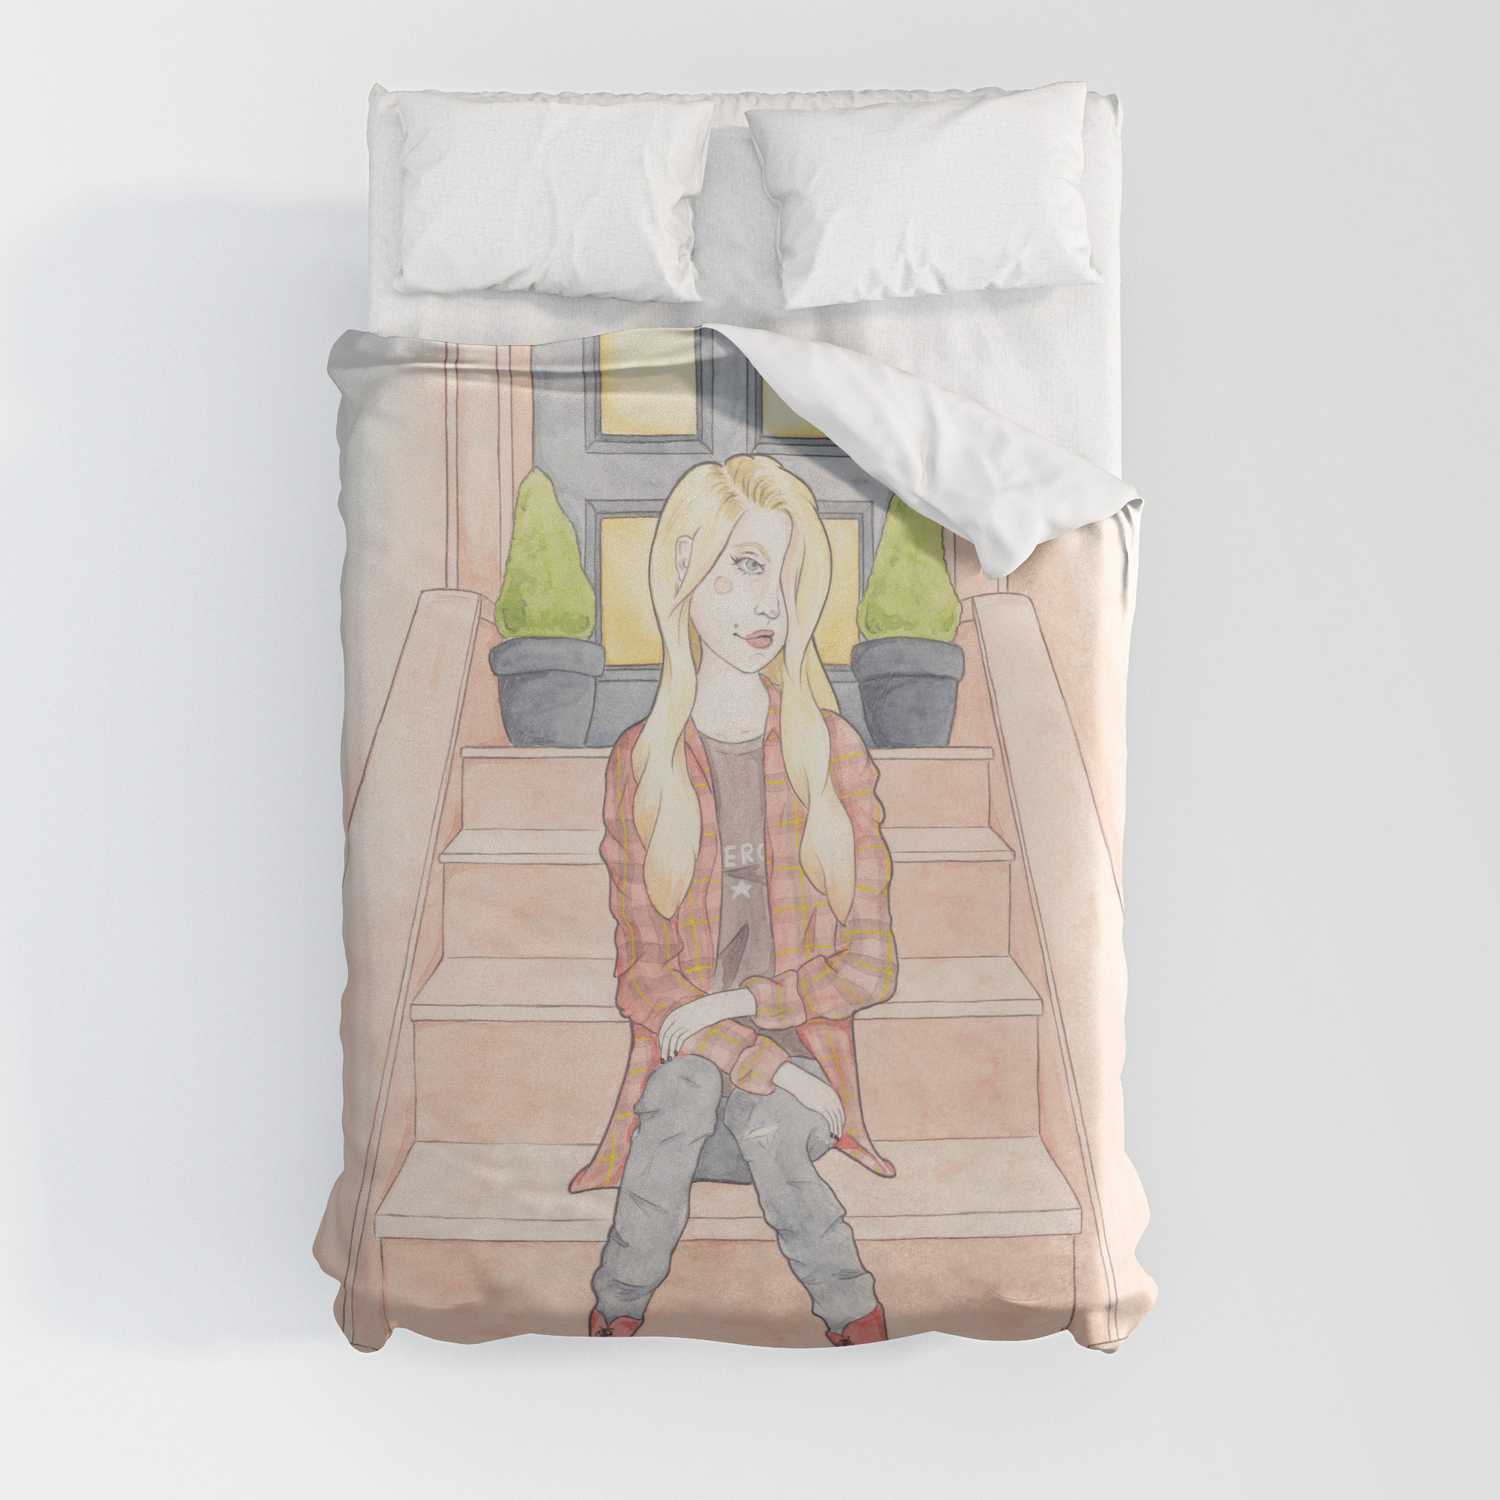 Sam, a 90s Grunge Music Fan in a Flannel Shirt, Band T-shirt, DM Boots  Watercolor Illustration Duvet Cover by A Rose Cast | Society6